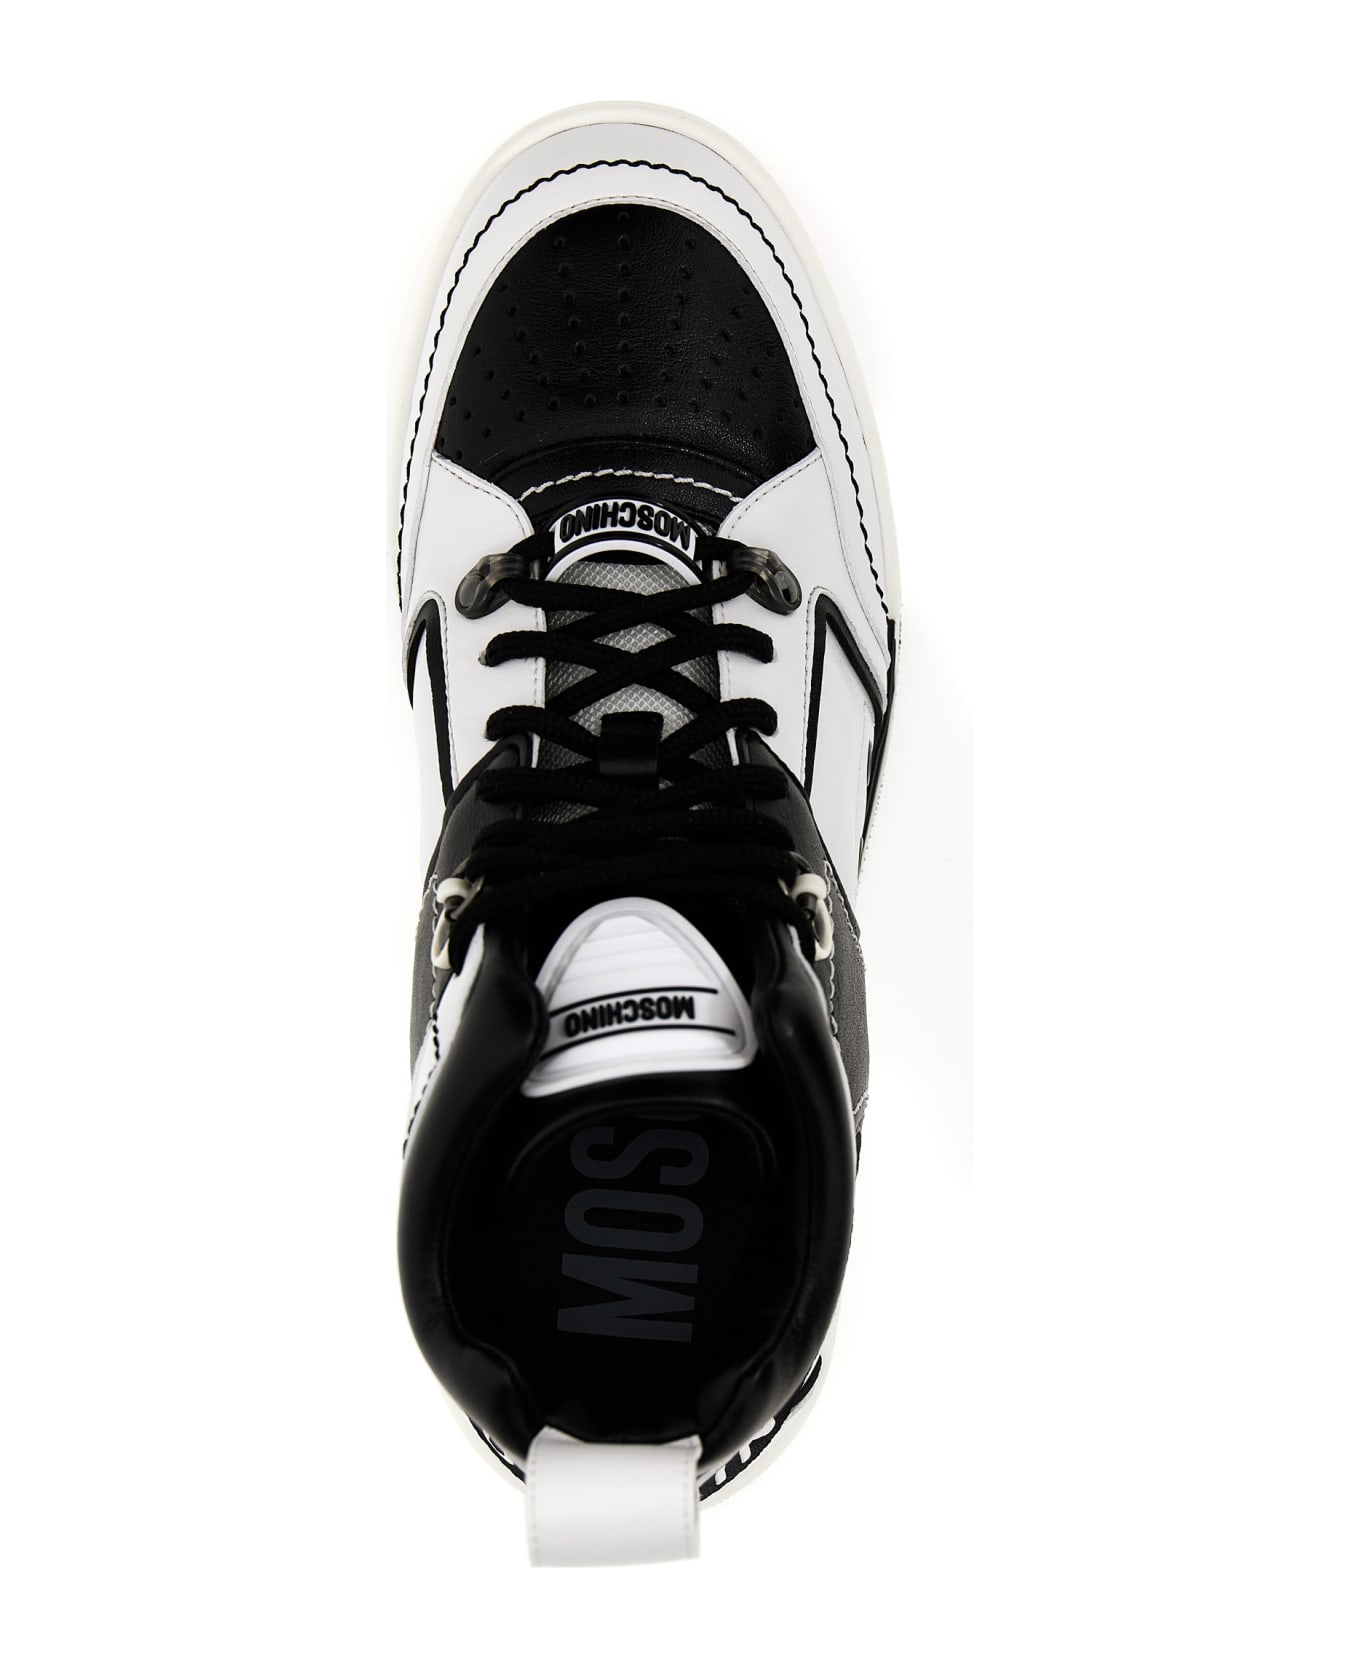 Moschino 'kevin' Sneakers - White/Black スニーカー